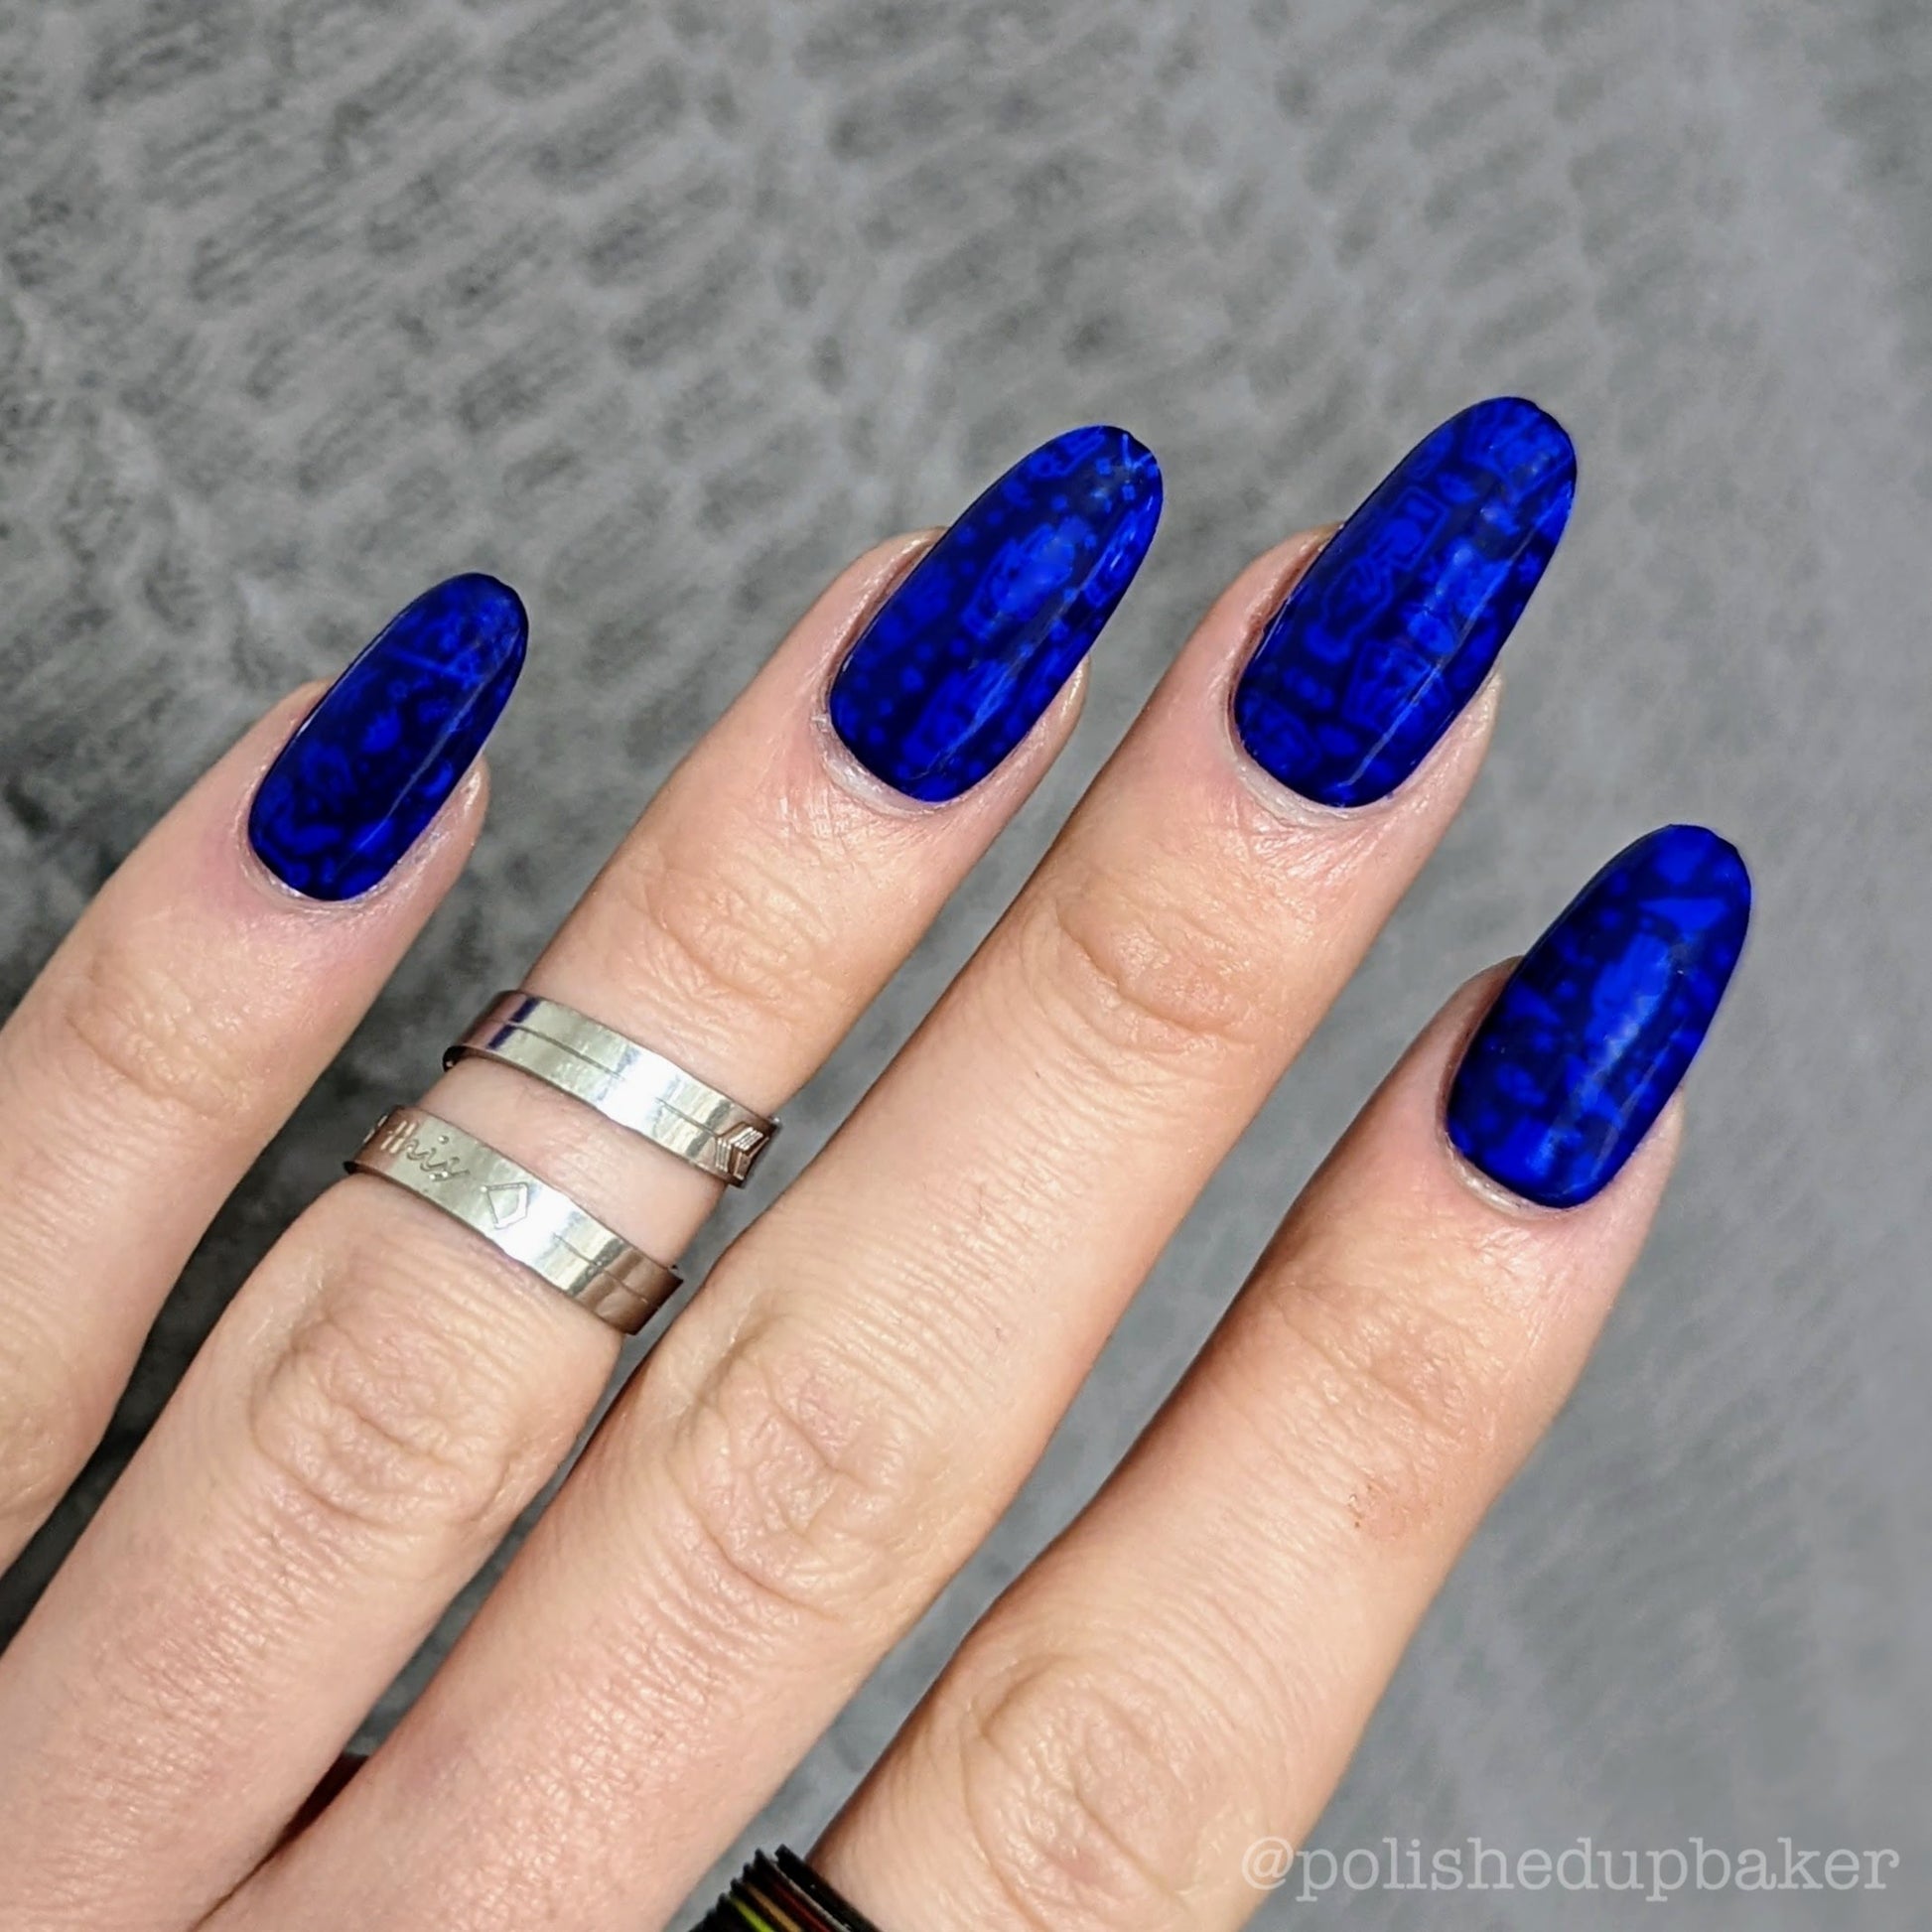 Invisiblue - Thermal Nail Polish - Clearly Rainbows Collection - Dam